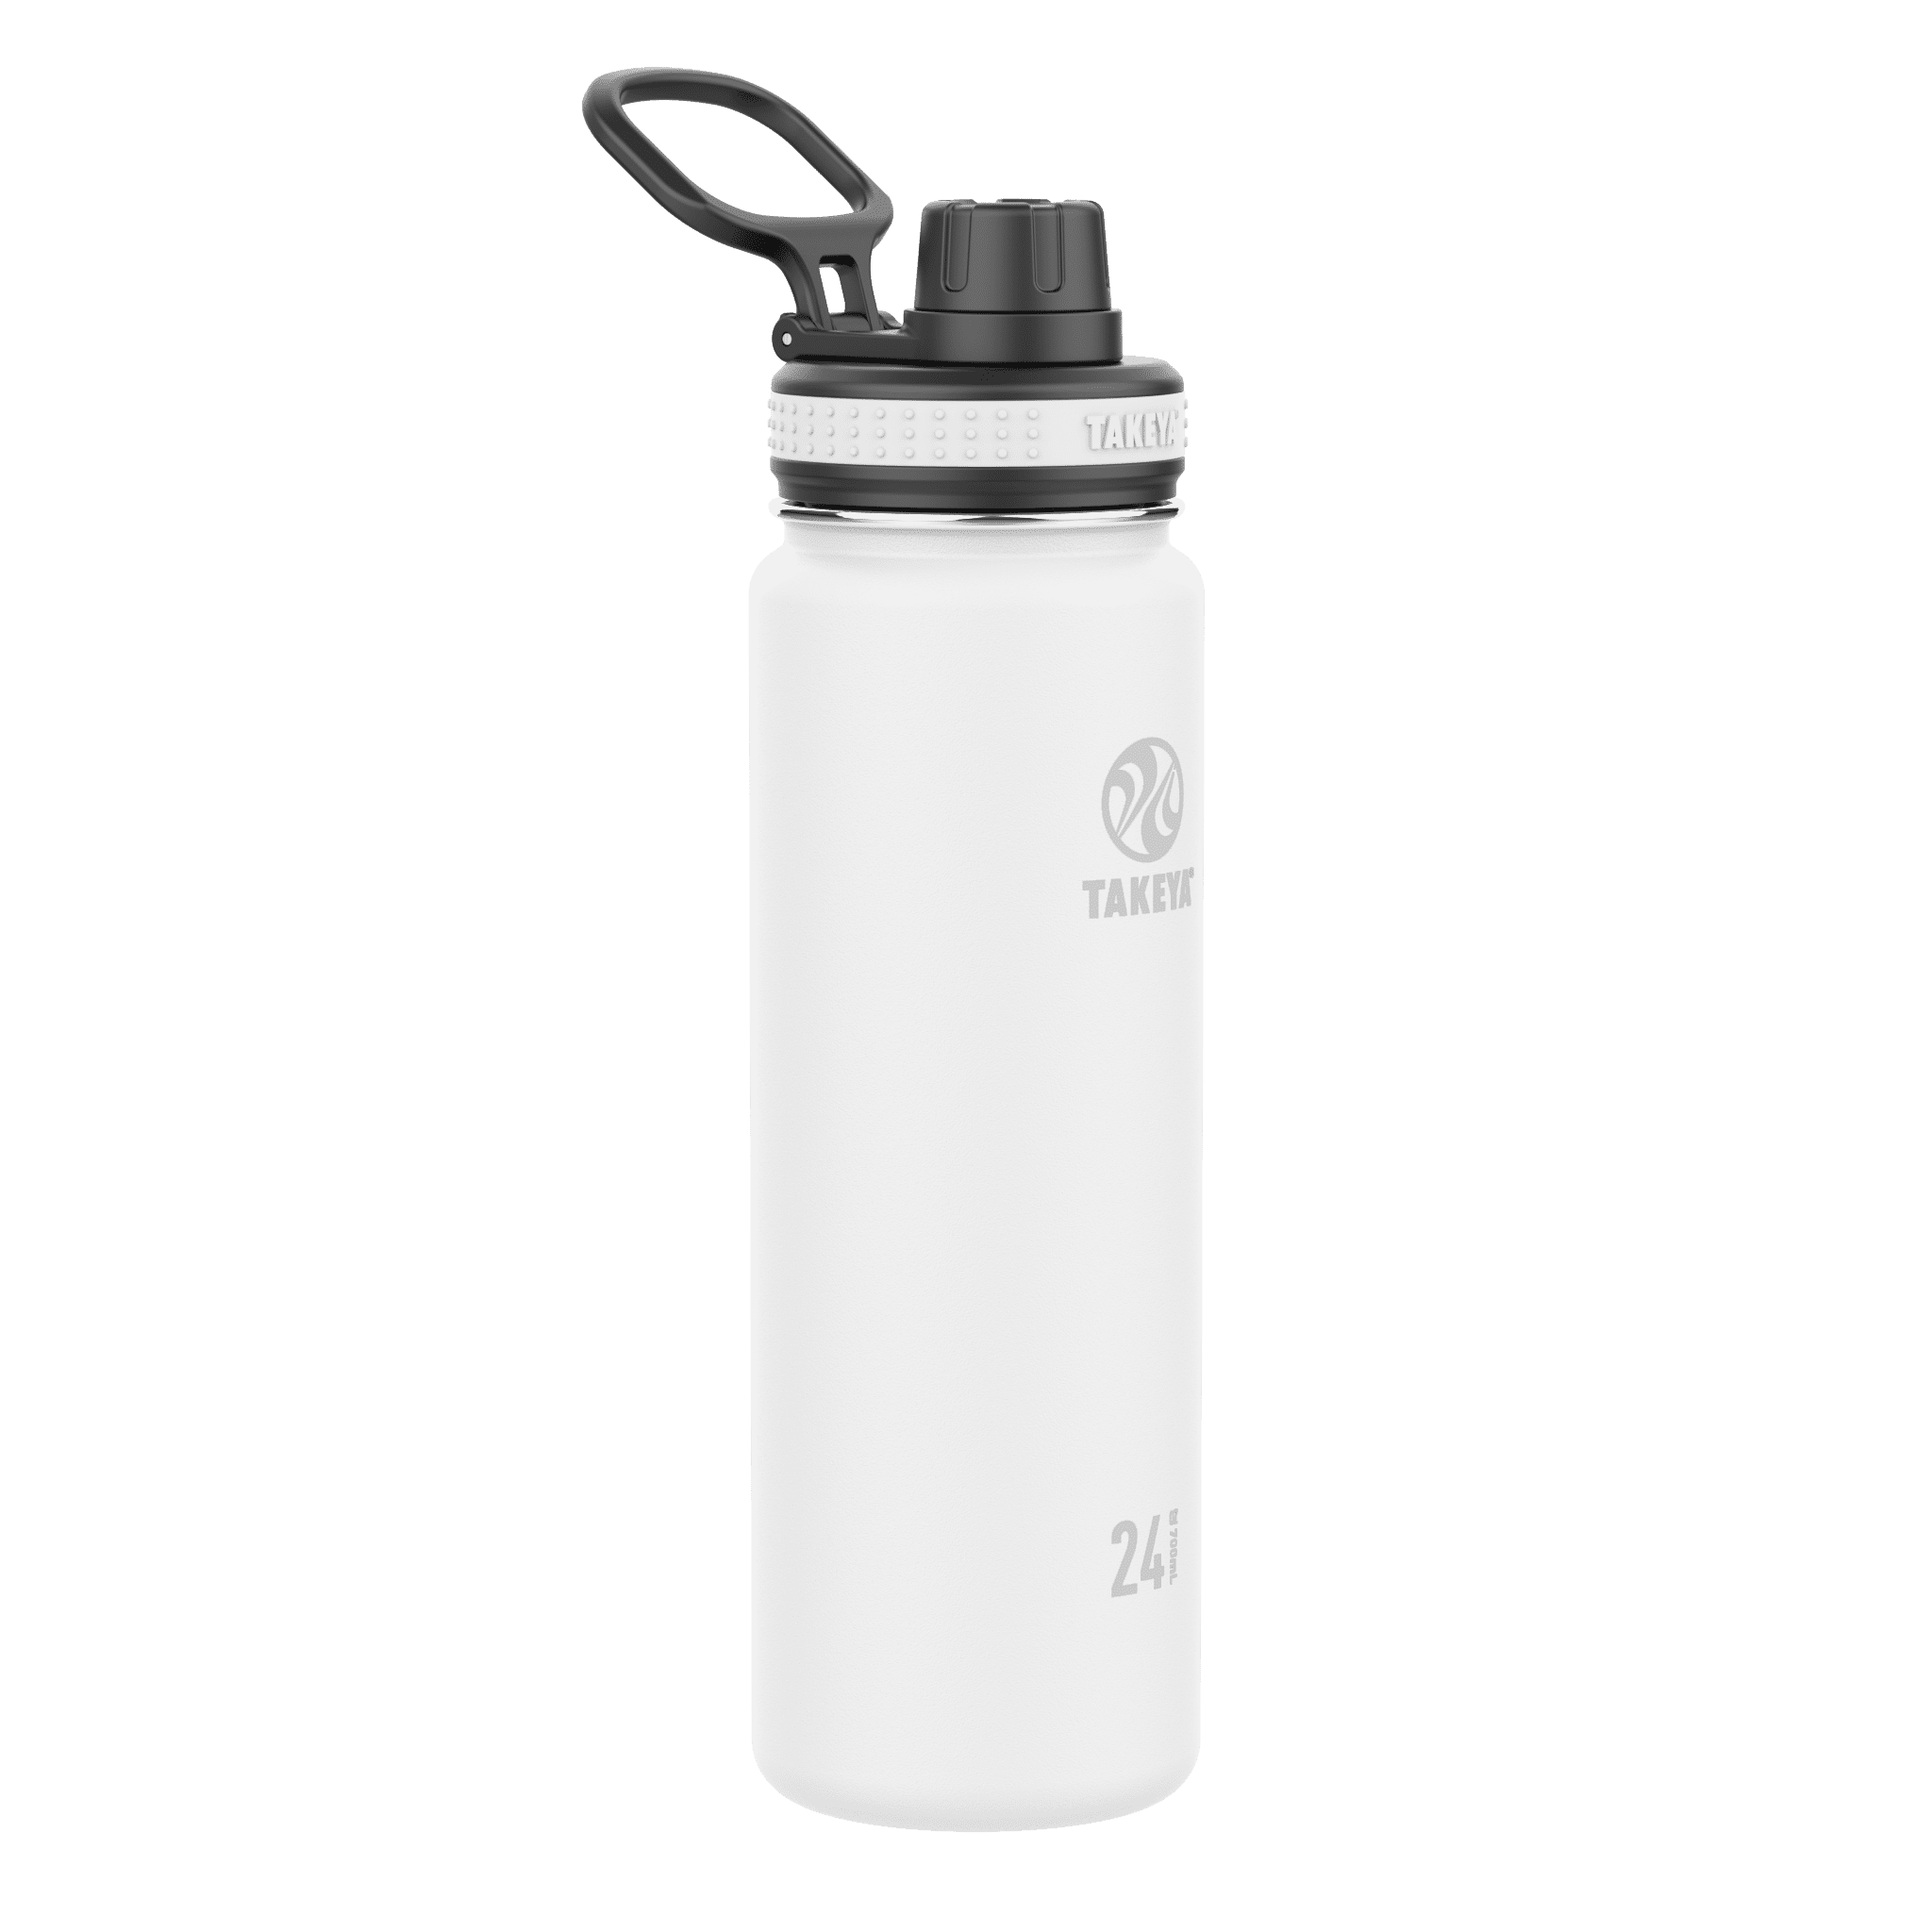 Takeya 24 oz. ThermoFlask Insulated Stainless Steel Water Bottle, 2-pack